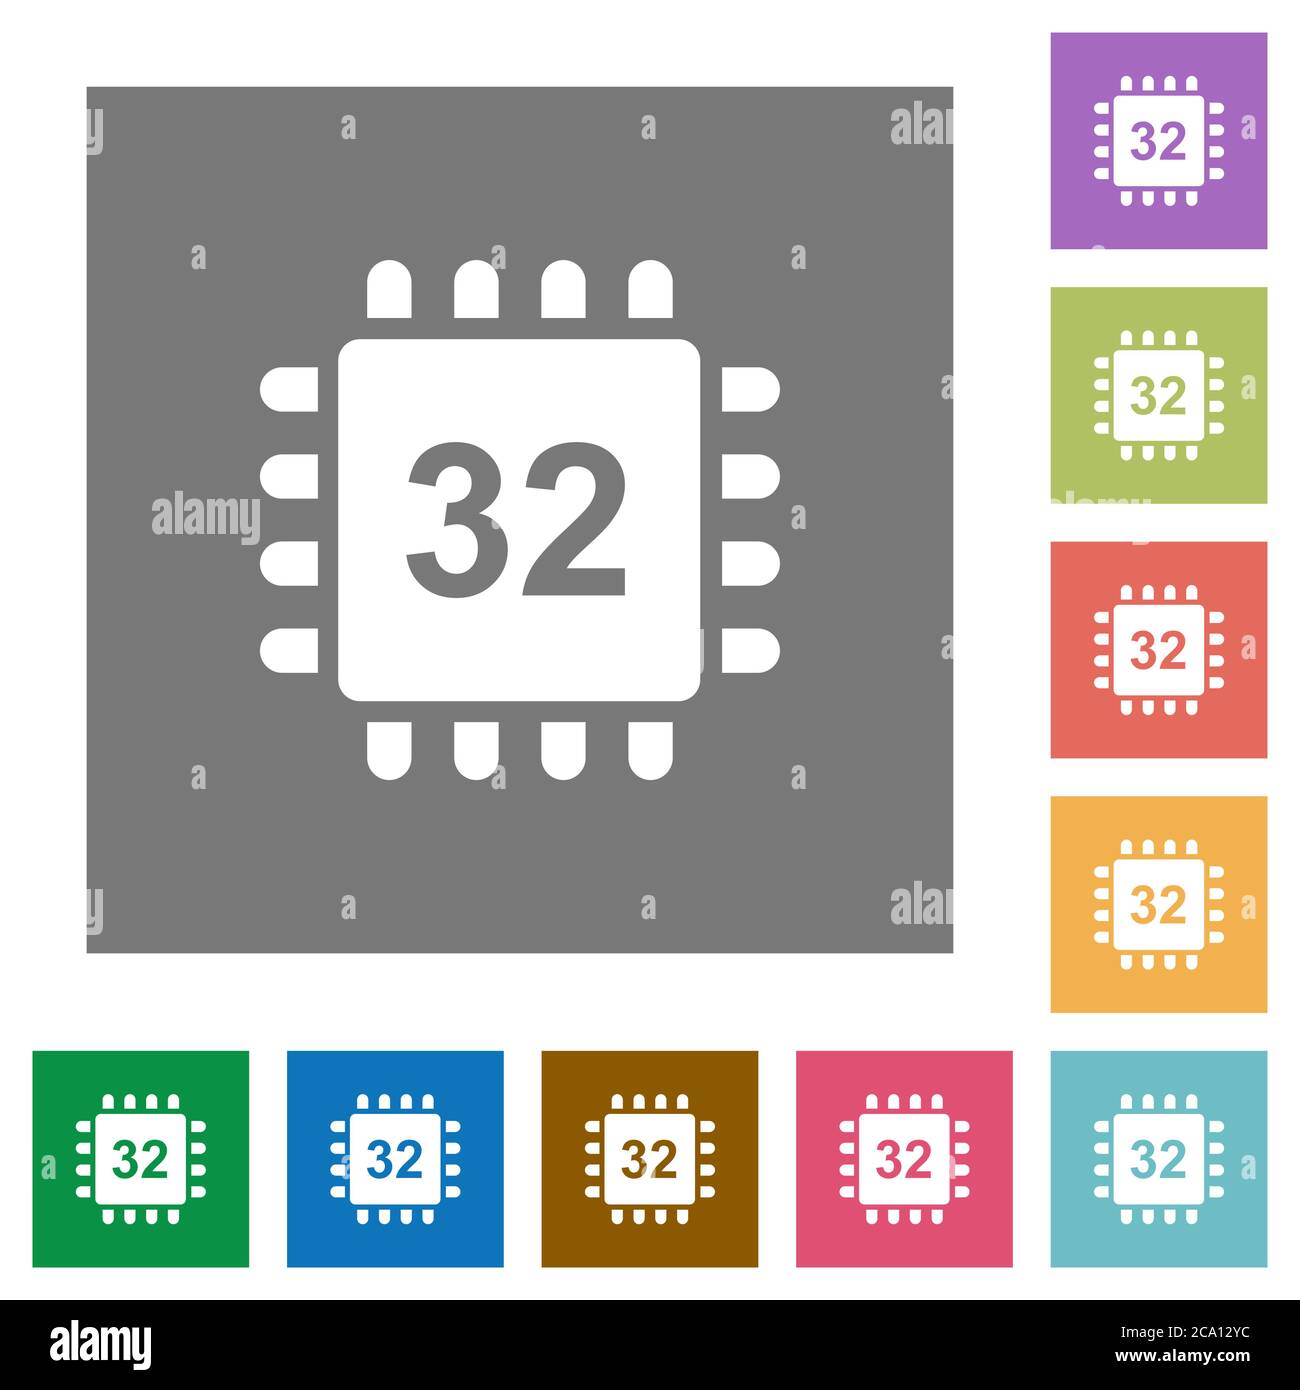 Microprocessor 32 bit architecture flat icons on simple color square backgrounds Stock Vector